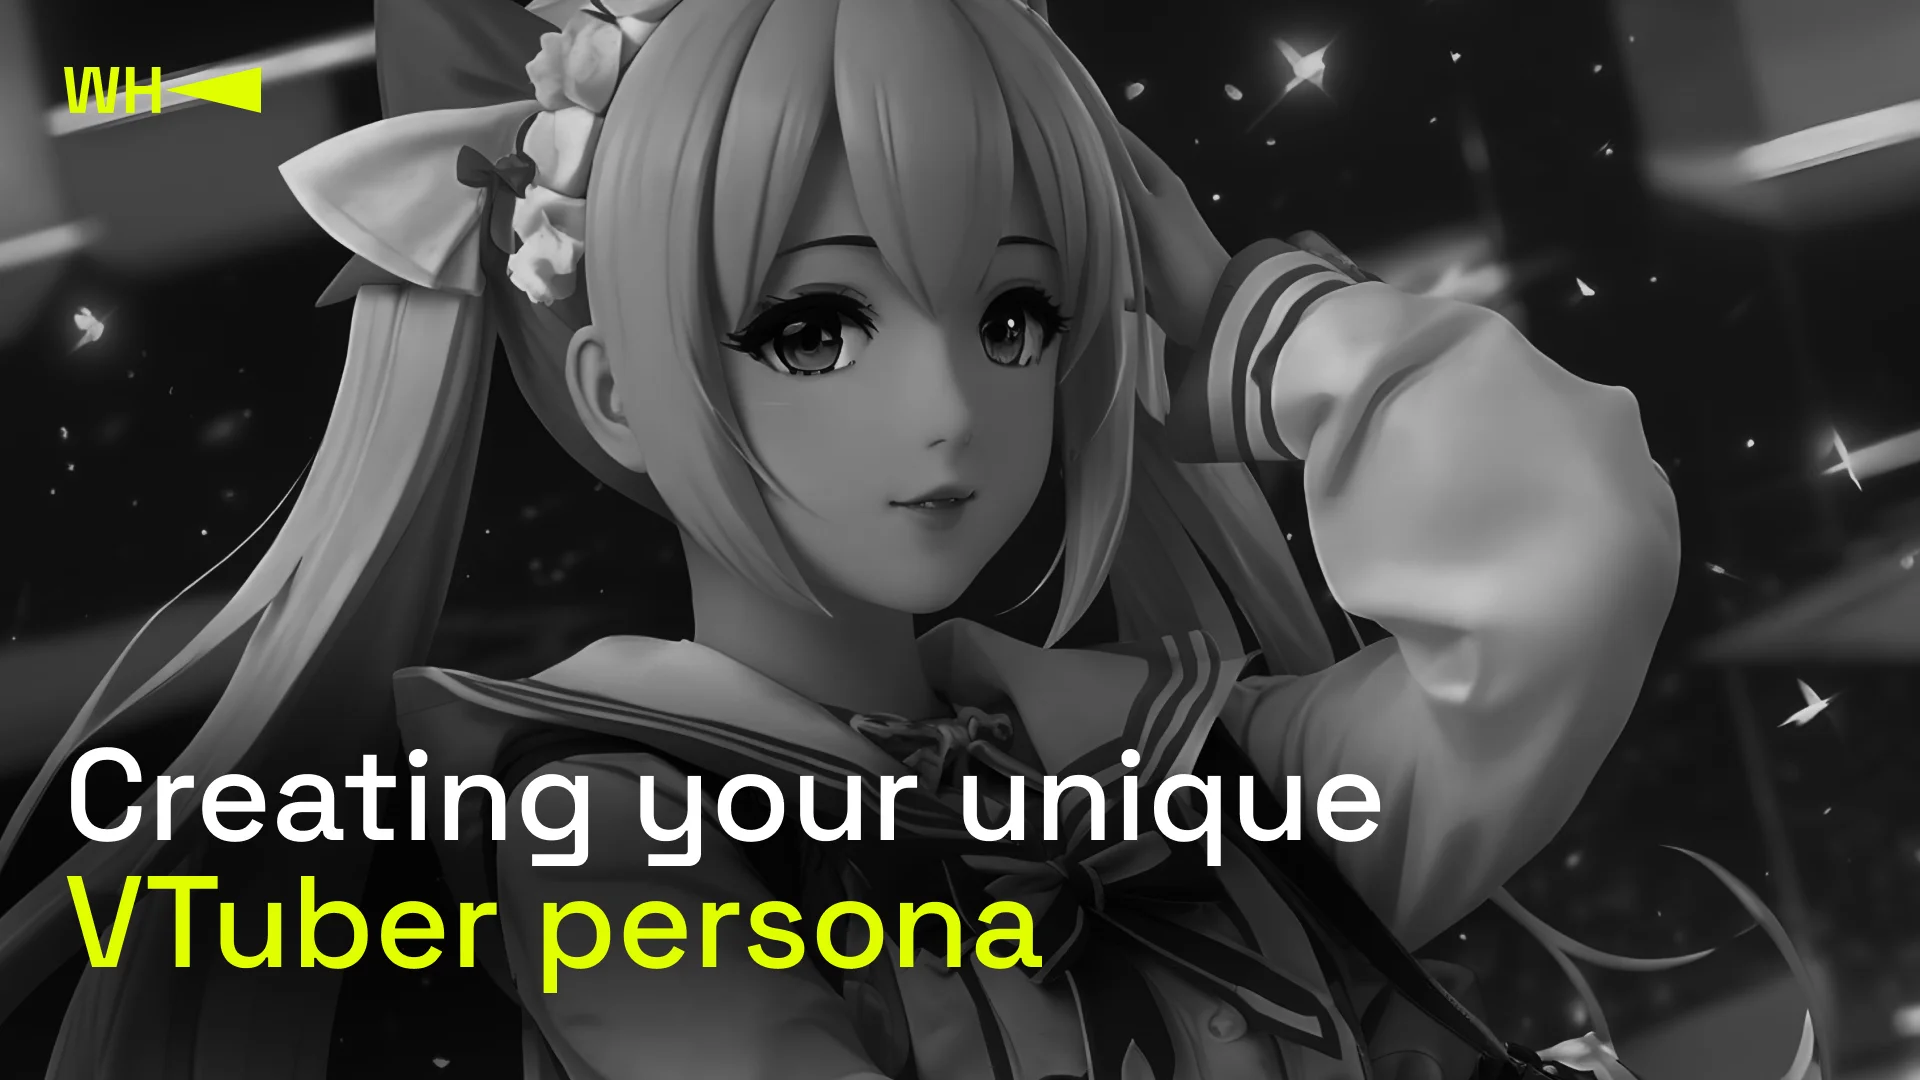 Creating your unique VTuber persona. Credit: WePlay Holding